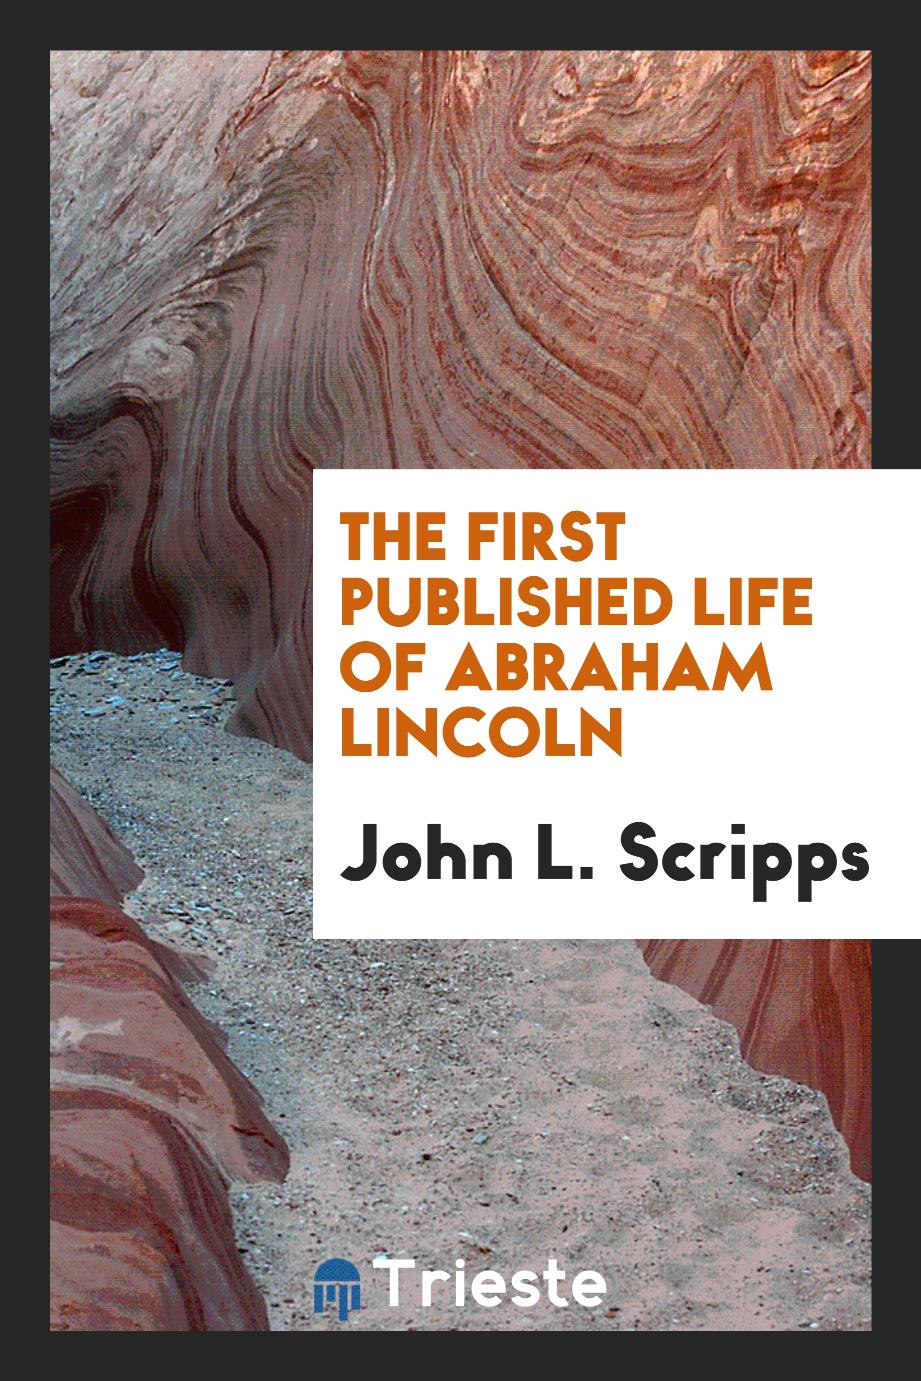 The first published life of Abraham Lincoln